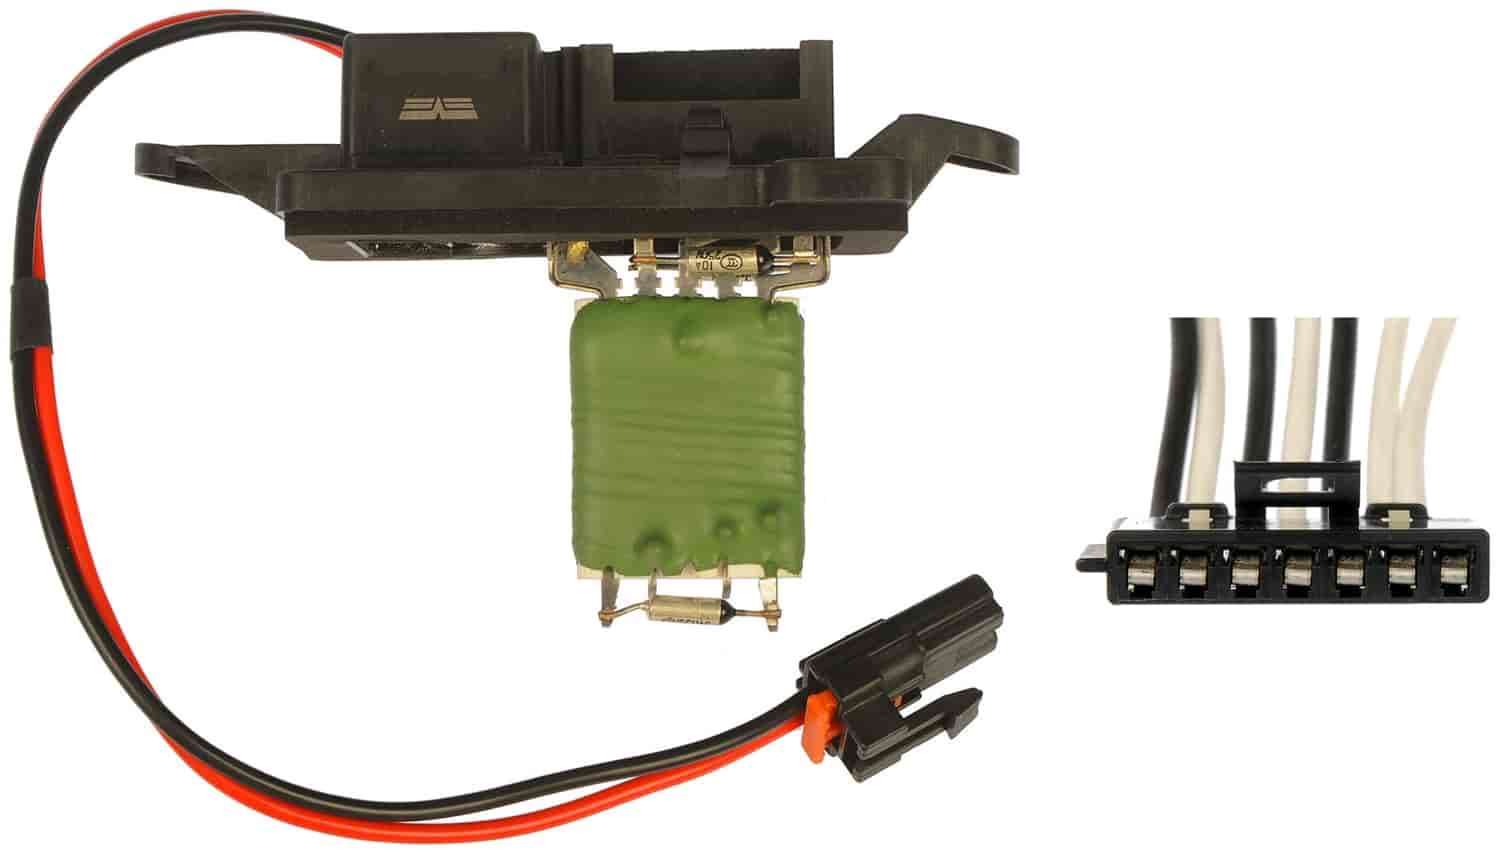 Blower Motor Speed Resistor and Harness Pigtail